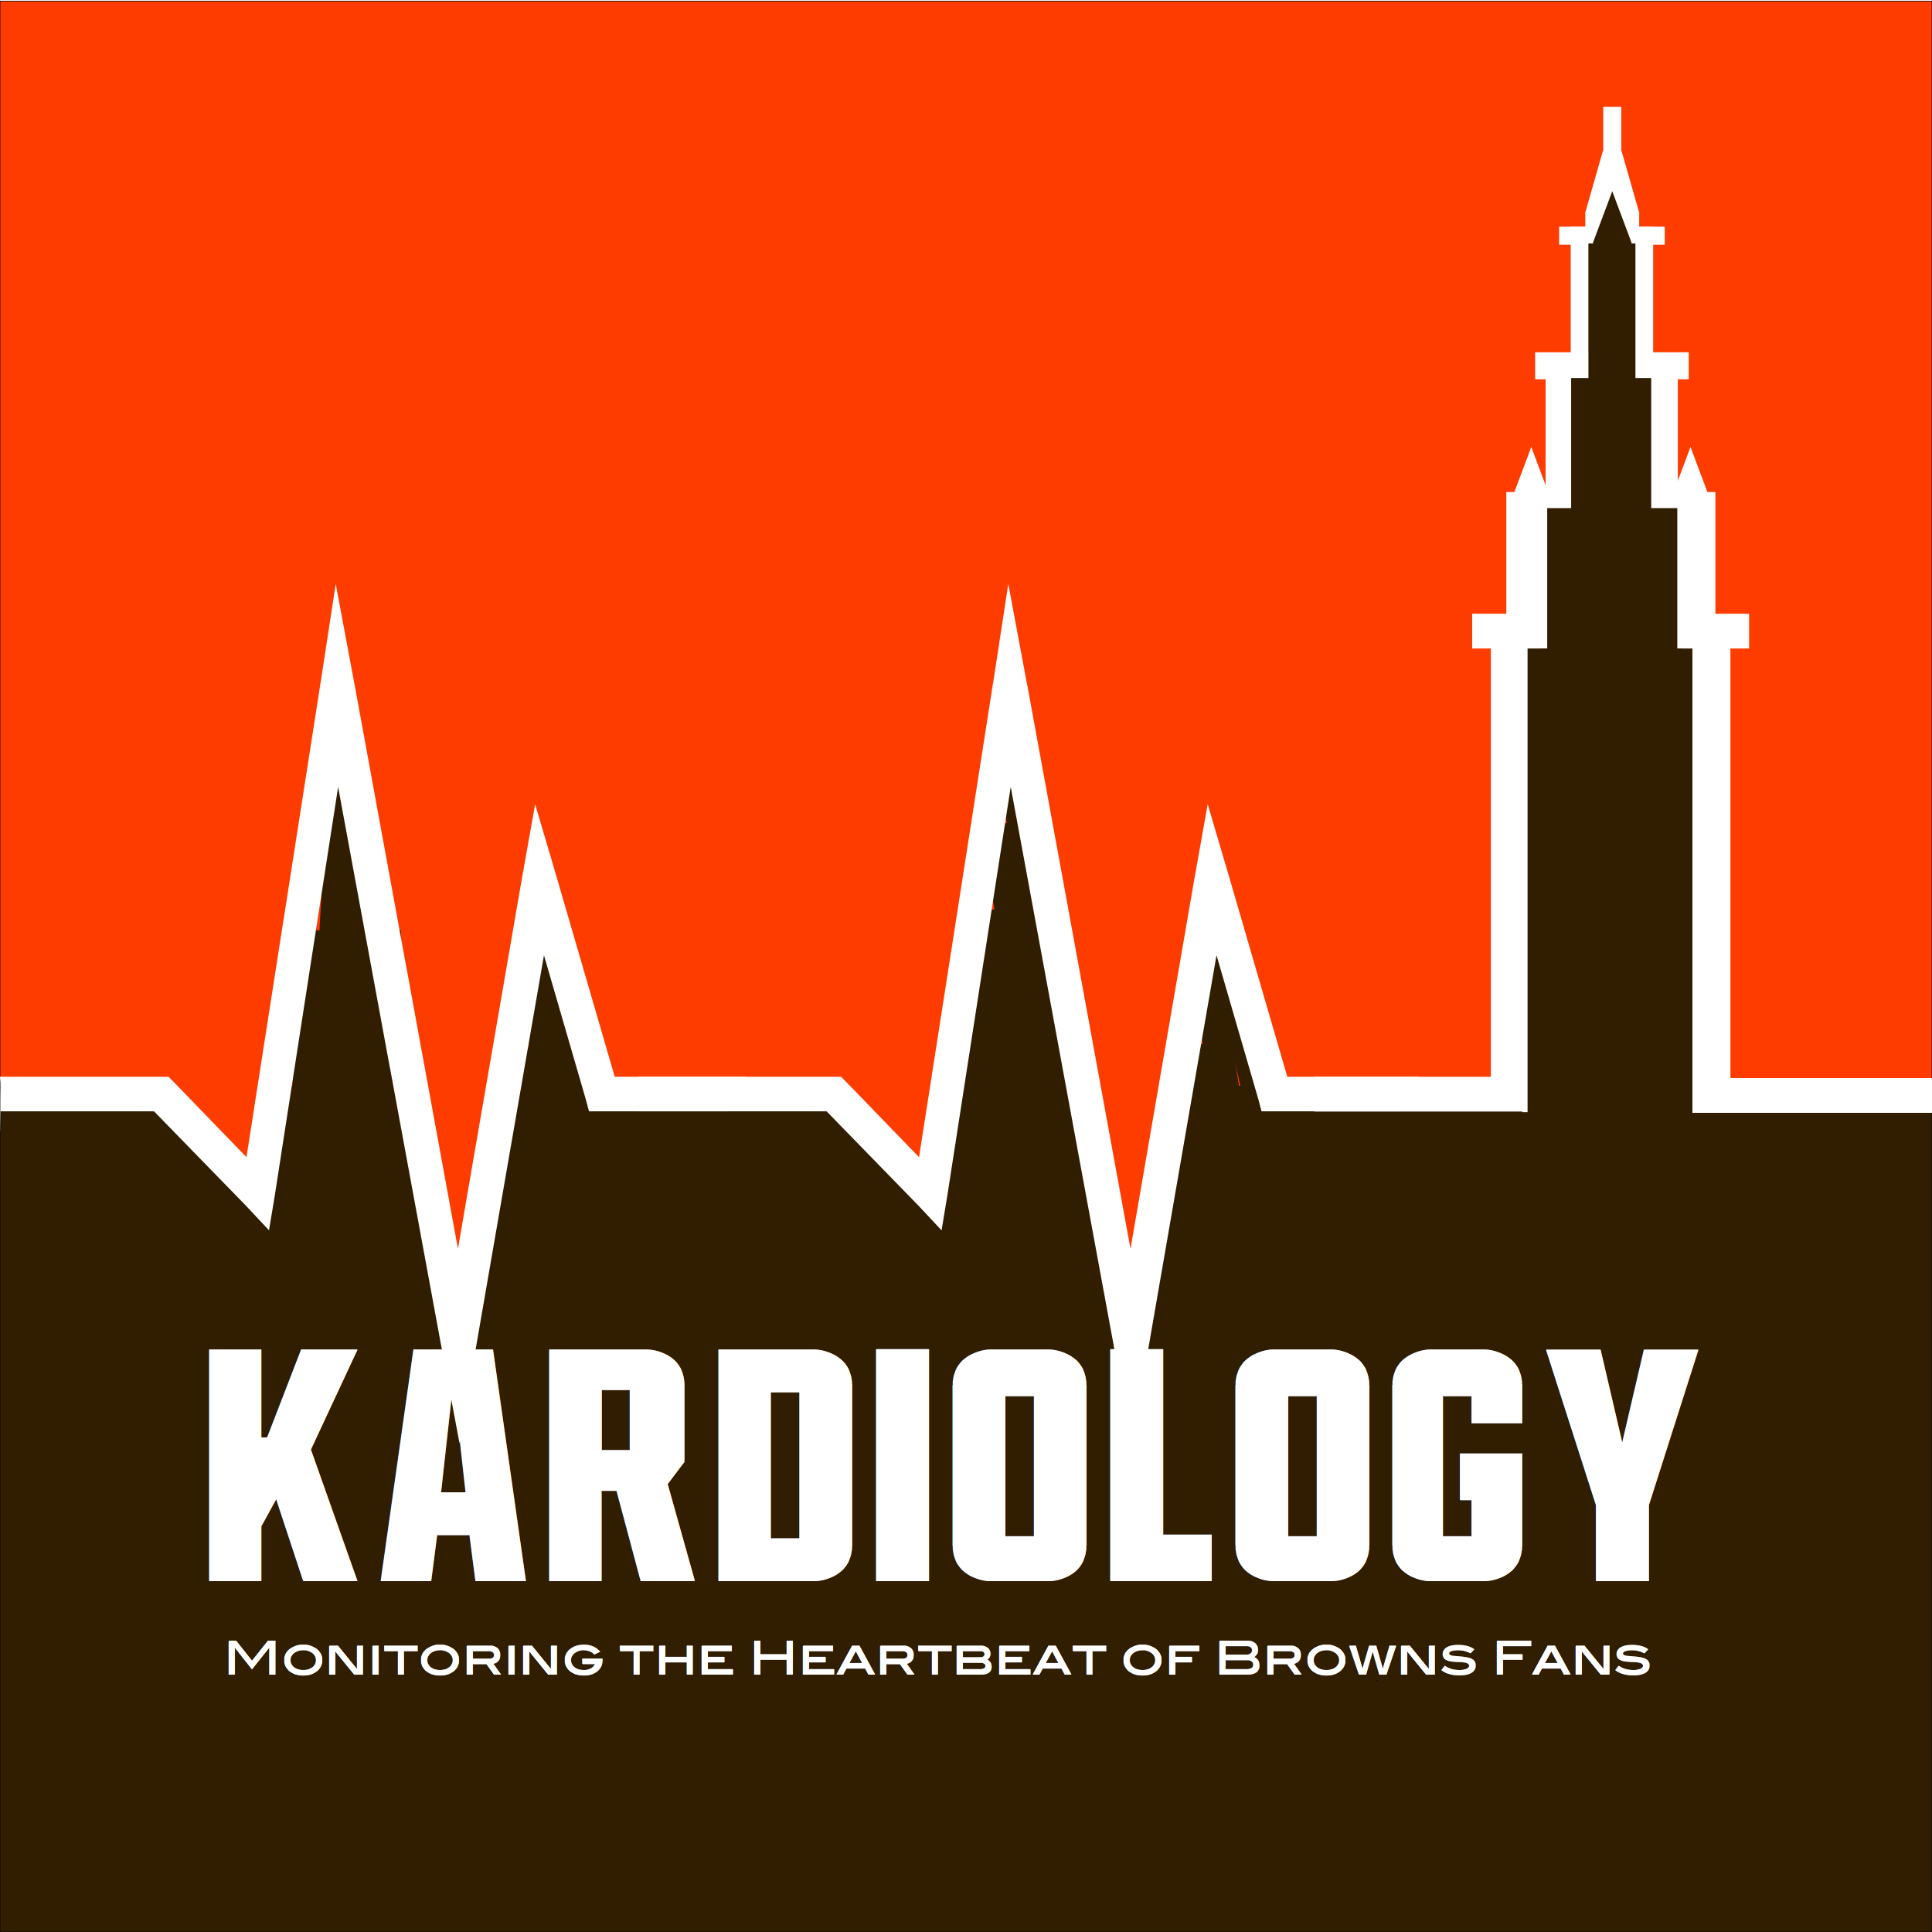 COMING SOON - The Kardiology Podcast